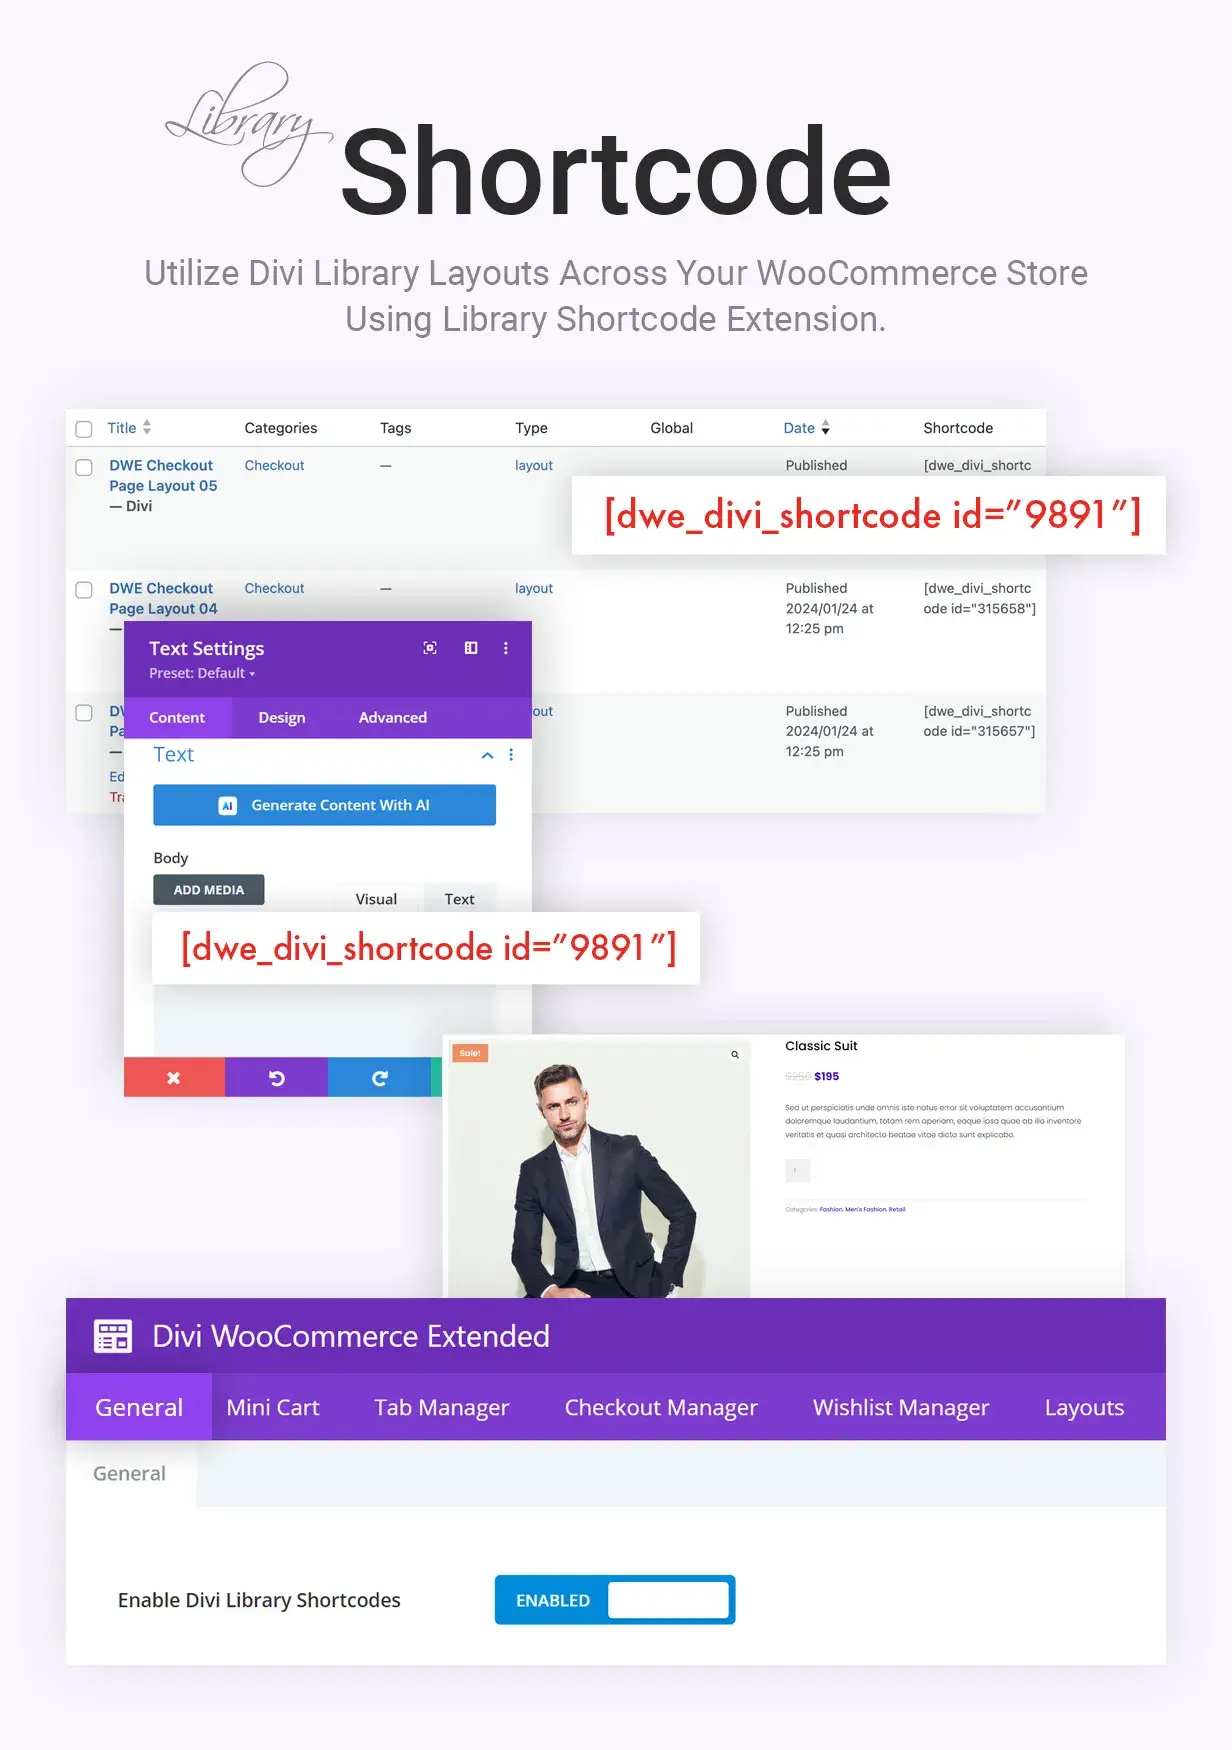 Woo Divi Library Shortcodes